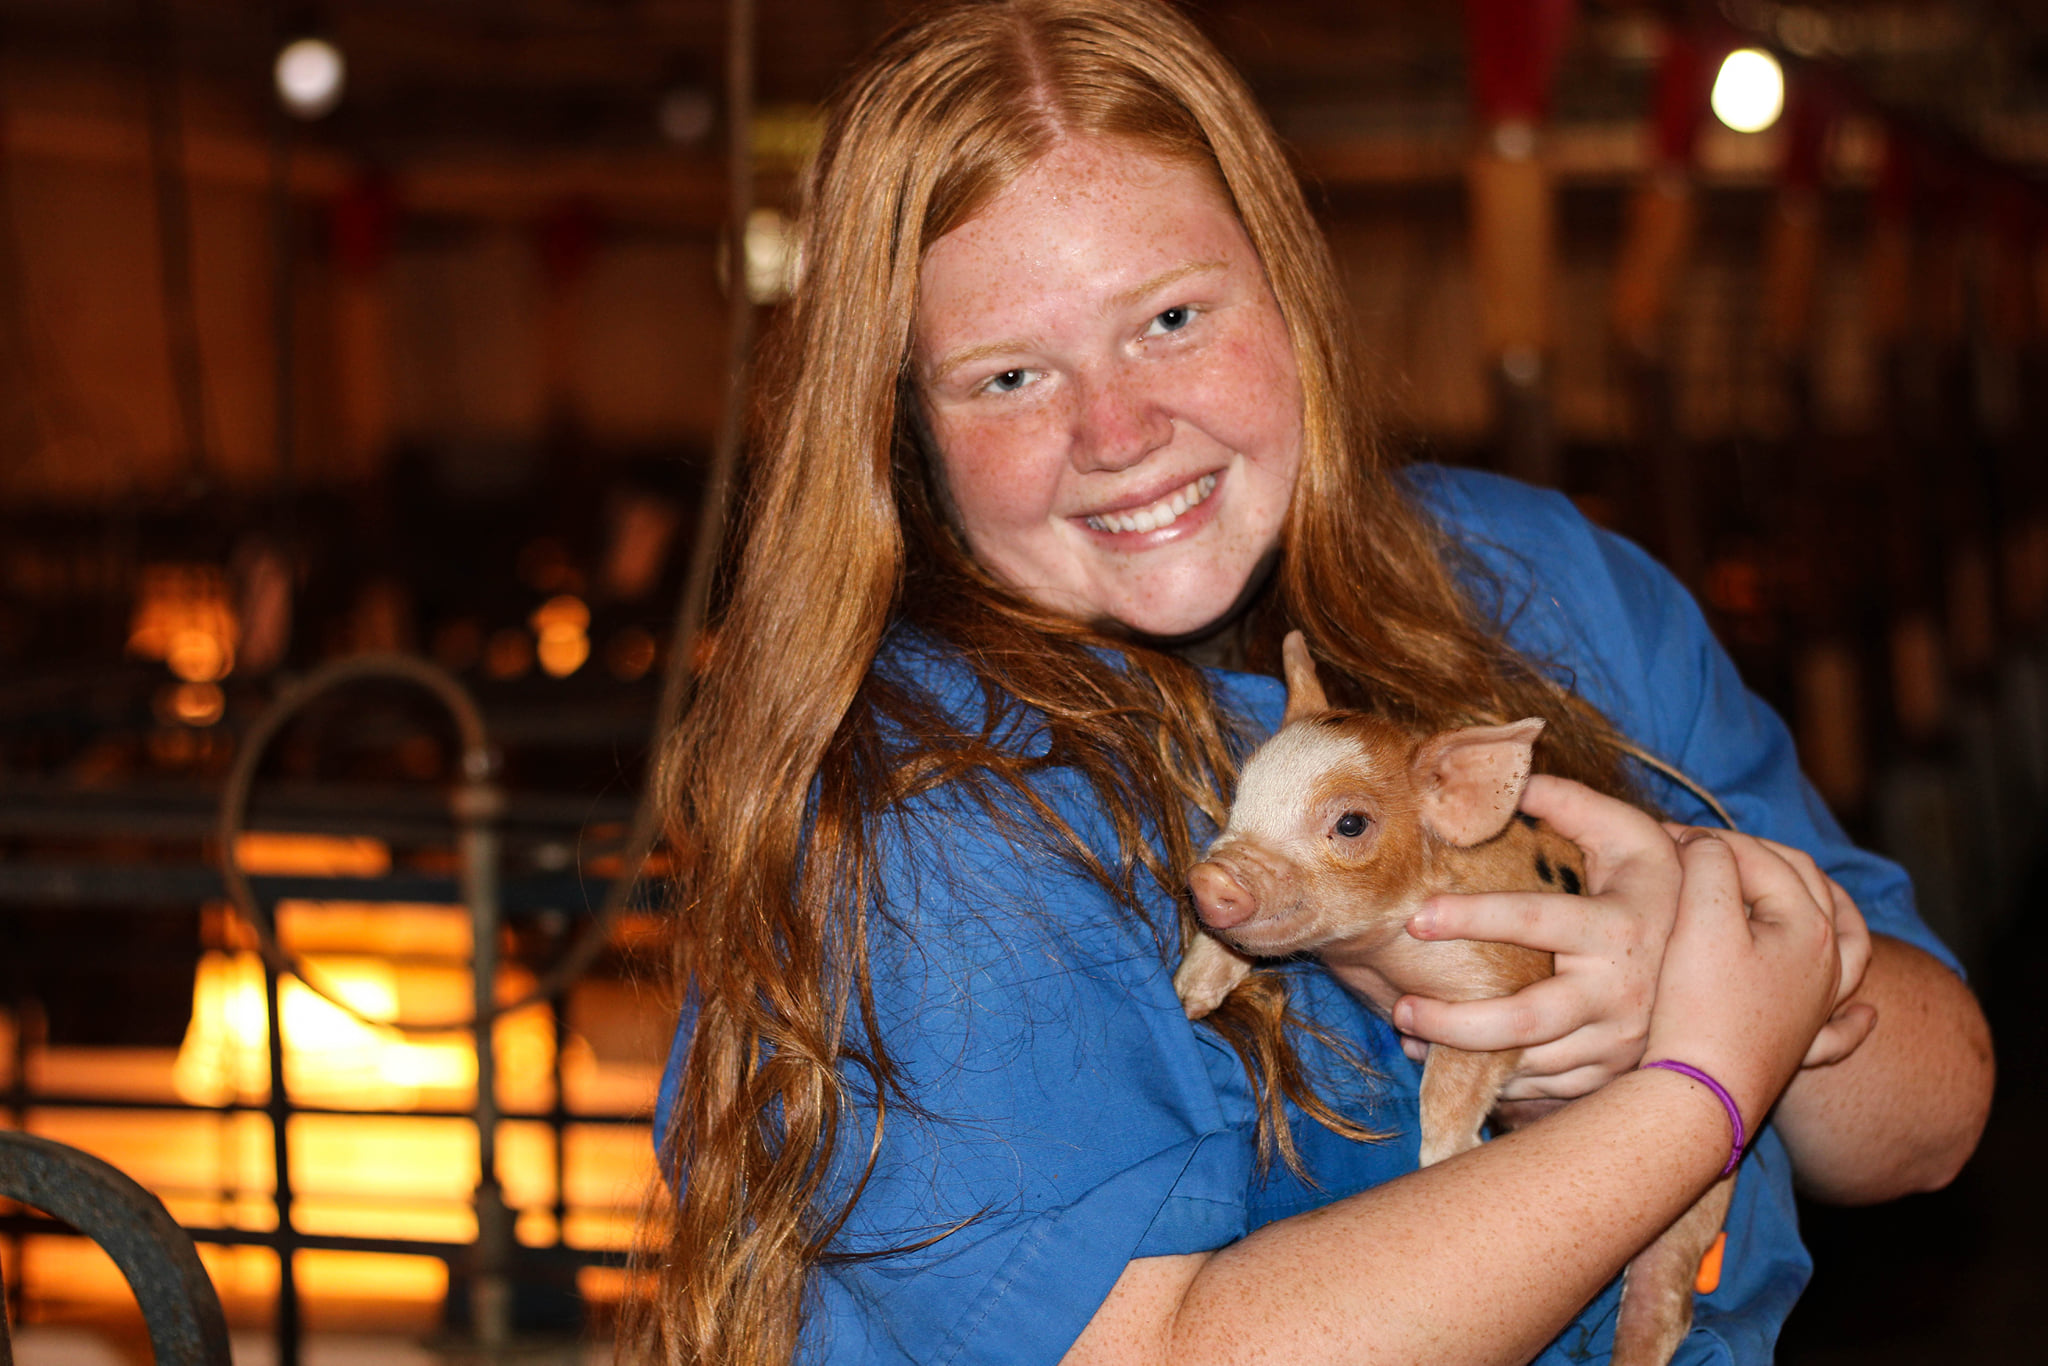 Grace holds a baby pig